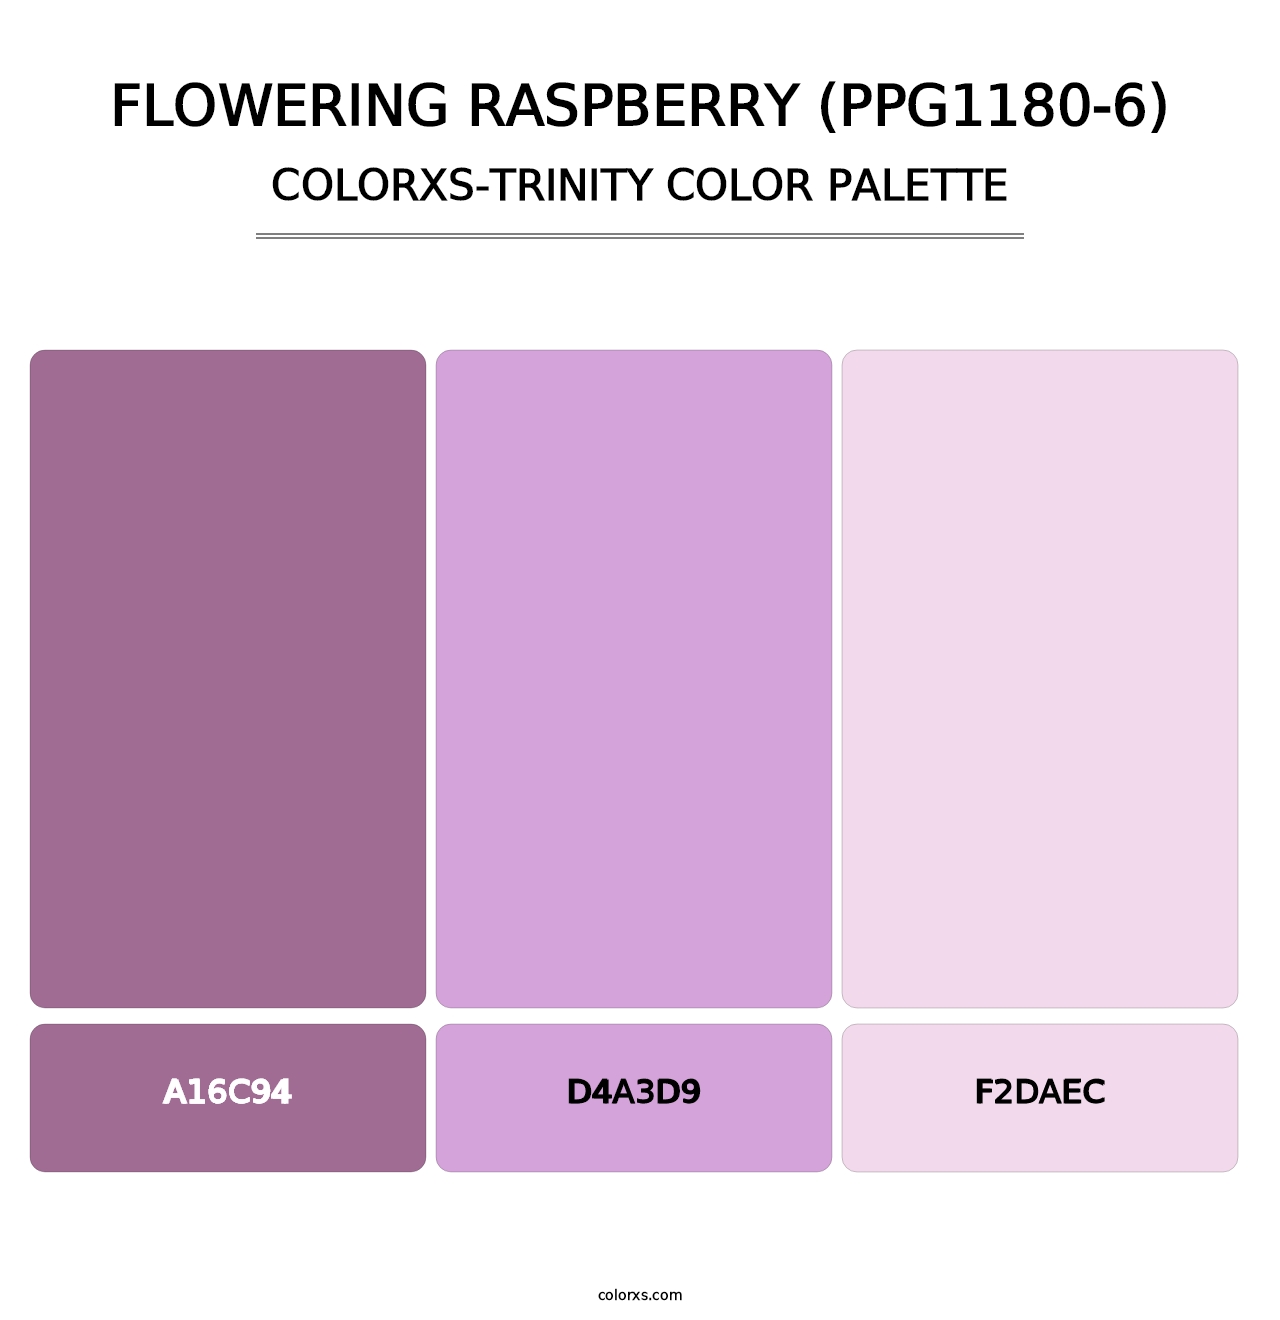 Flowering Raspberry (PPG1180-6) - Colorxs Trinity Palette